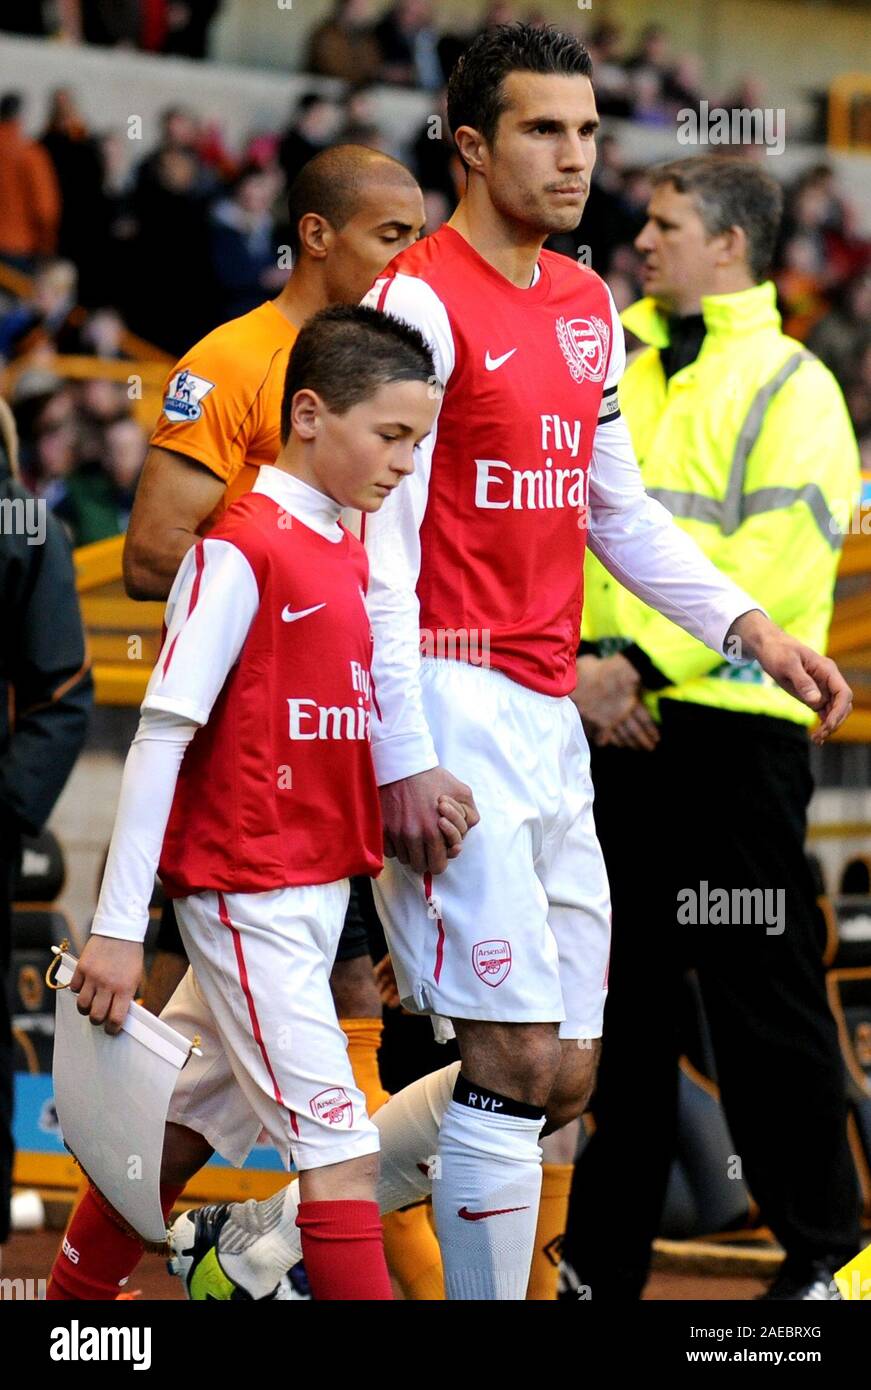 11th April 2012. Soccer - Premiership Football - Wolverhampton Wanderers Vs Arsenal. Arsenal Captain Robin Van Persie leads hist team out with a mascot.  Photographer: Paul Roberts/Oneuptop/Alamy. Stock Photo